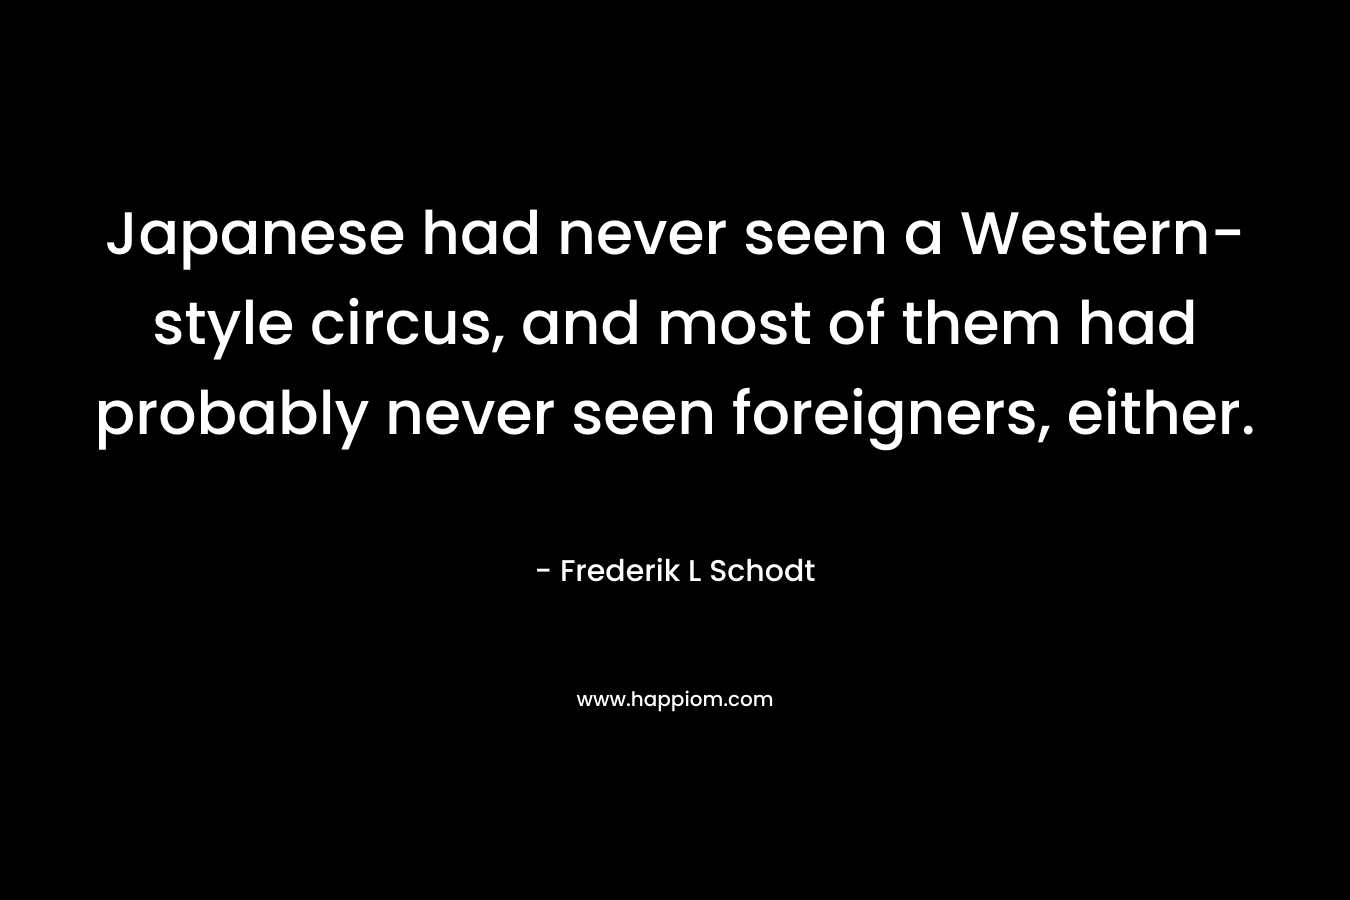 Japanese had never seen a Western-style circus, and most of them had probably never seen foreigners, either. – Frederik L Schodt